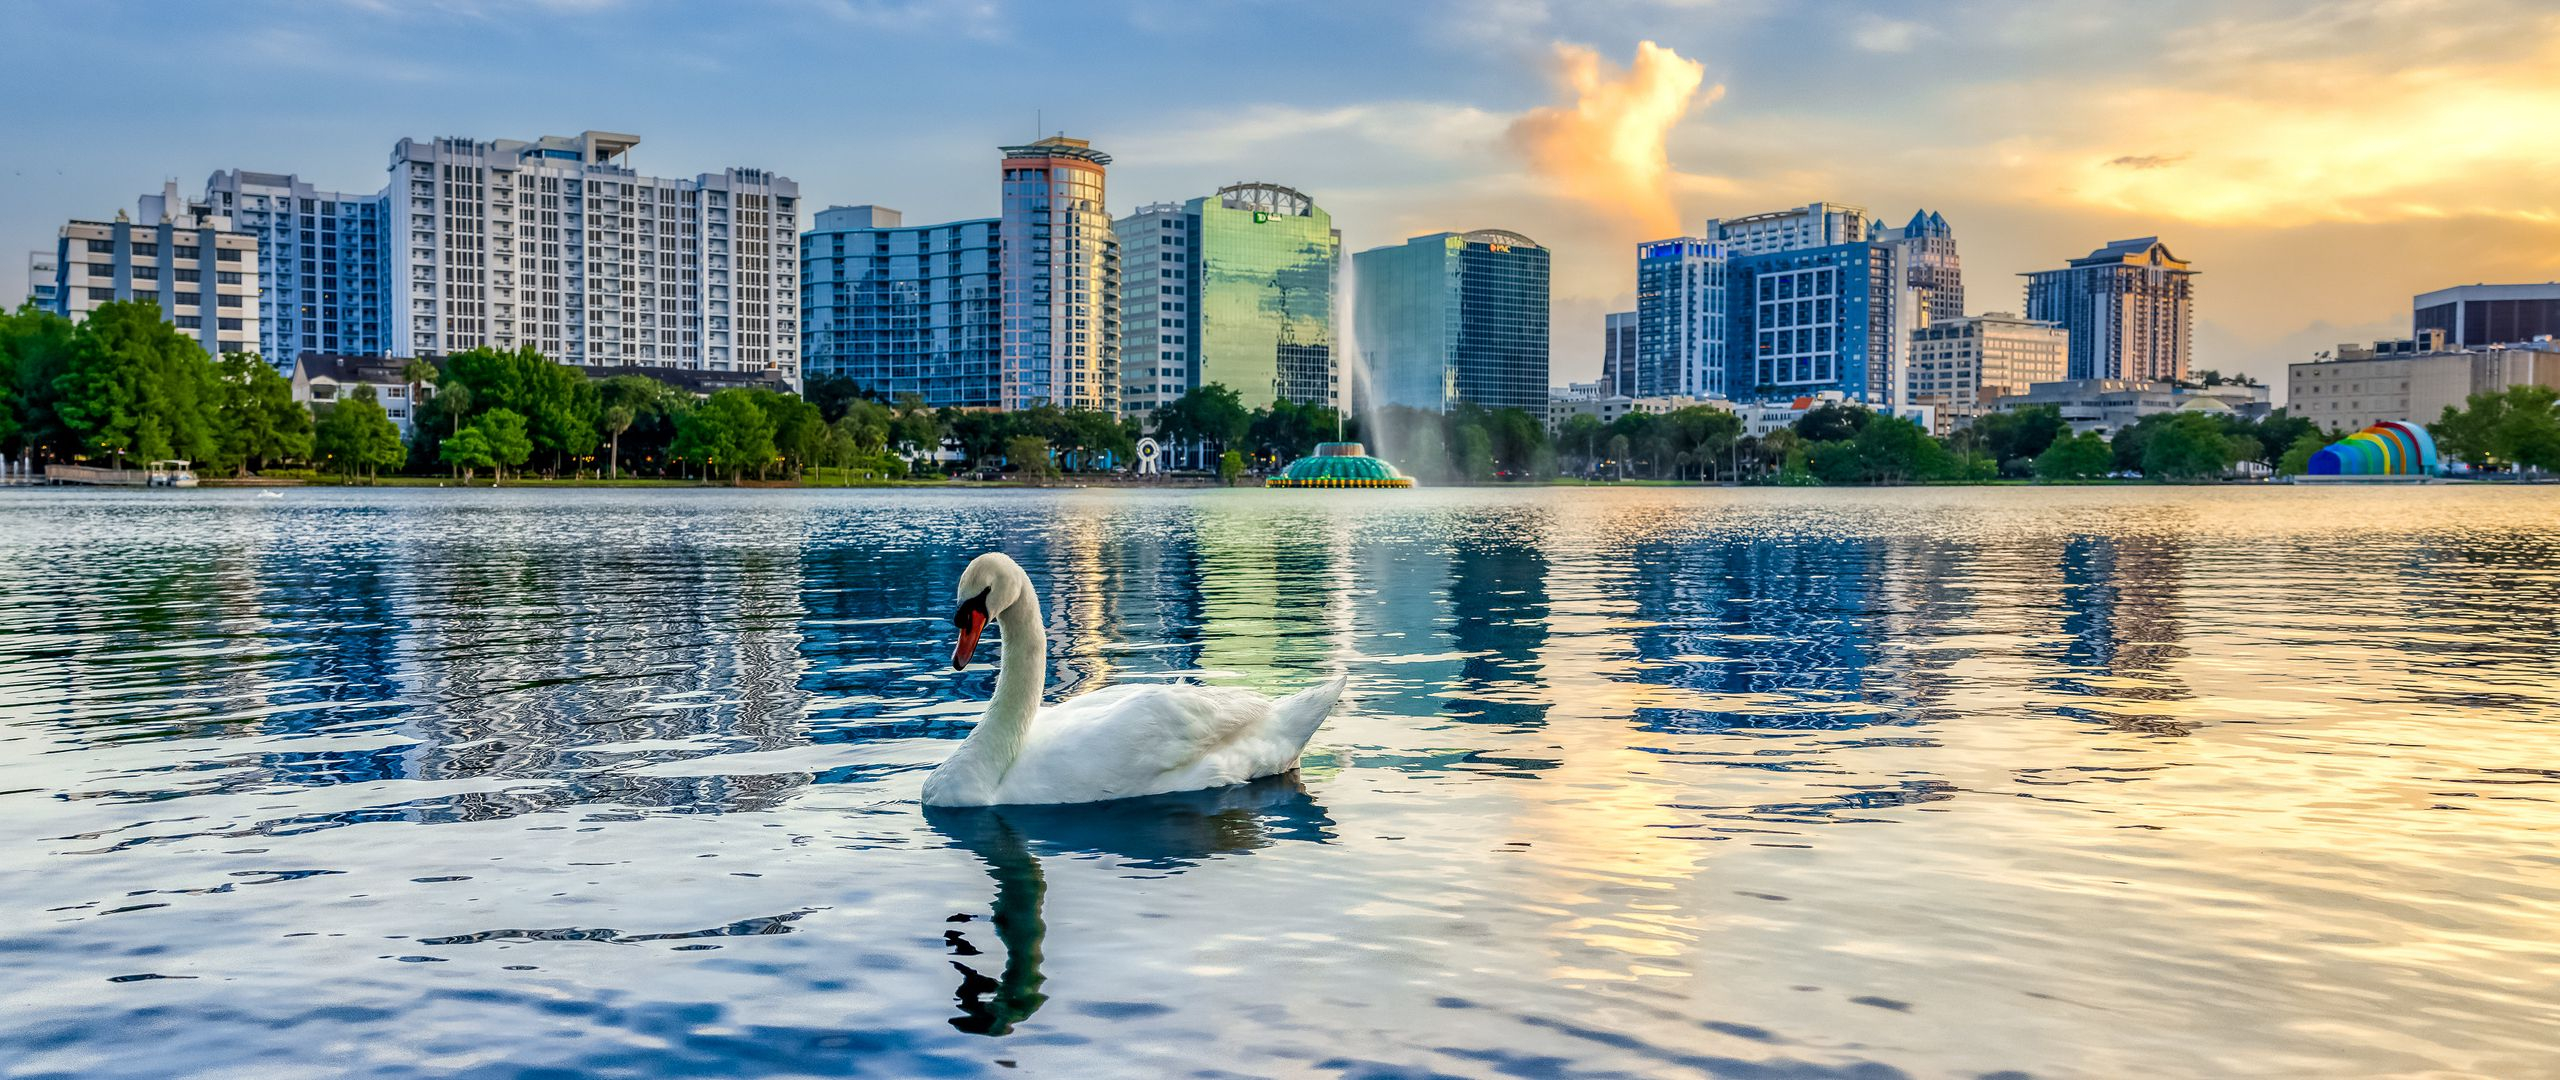 2560x1080 Swan in lake in the middle of city Wallpaper 2k Quad HD ID:10115